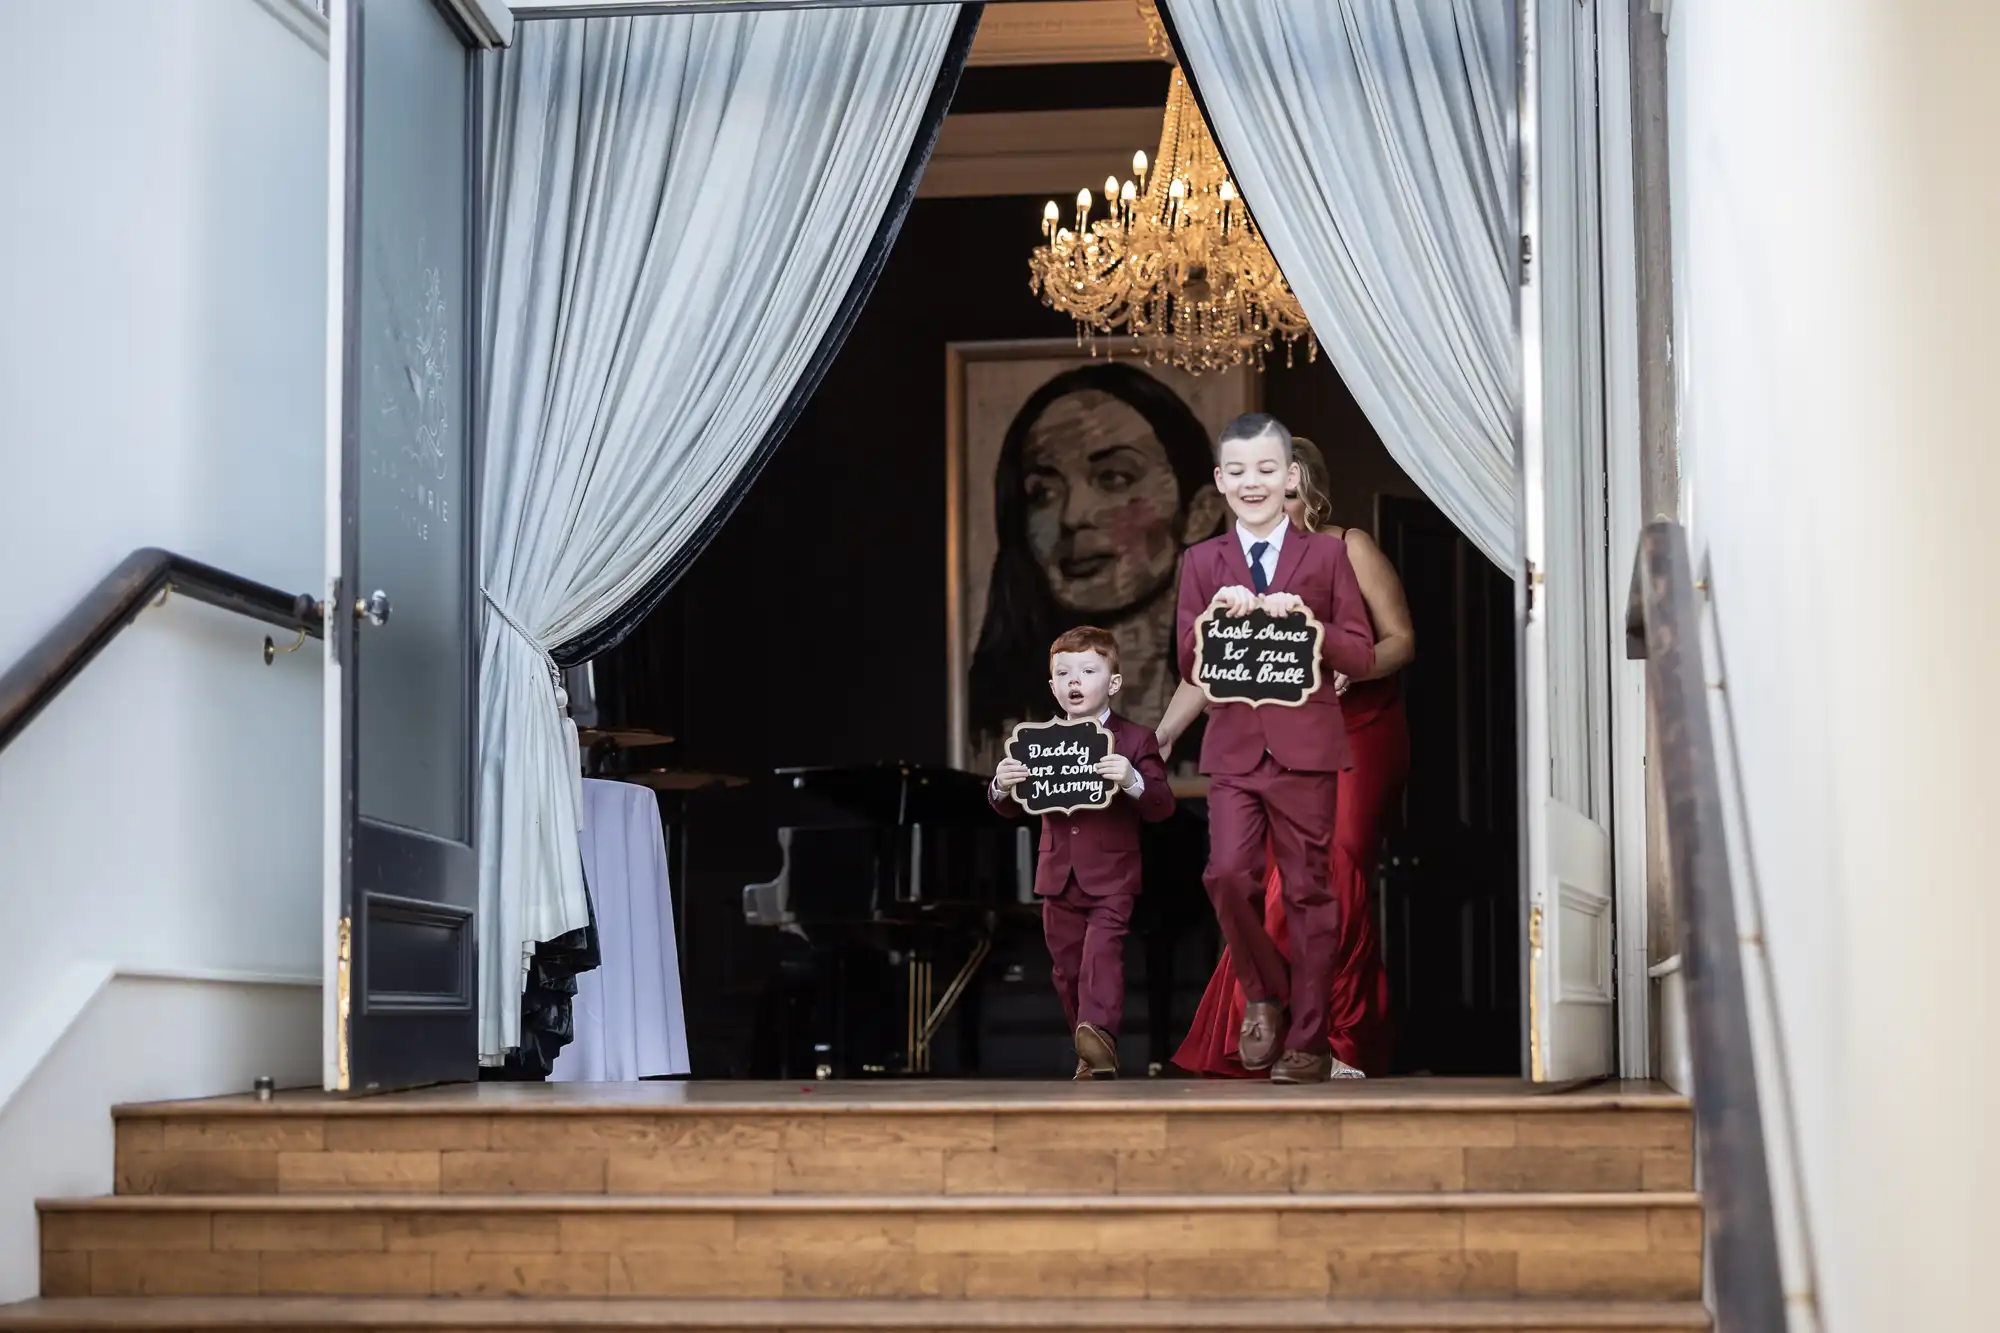 Two children dressed in matching maroon suits walk down a staircase, each holding a sign. The interior shows draped curtains and a chandelier in the background.